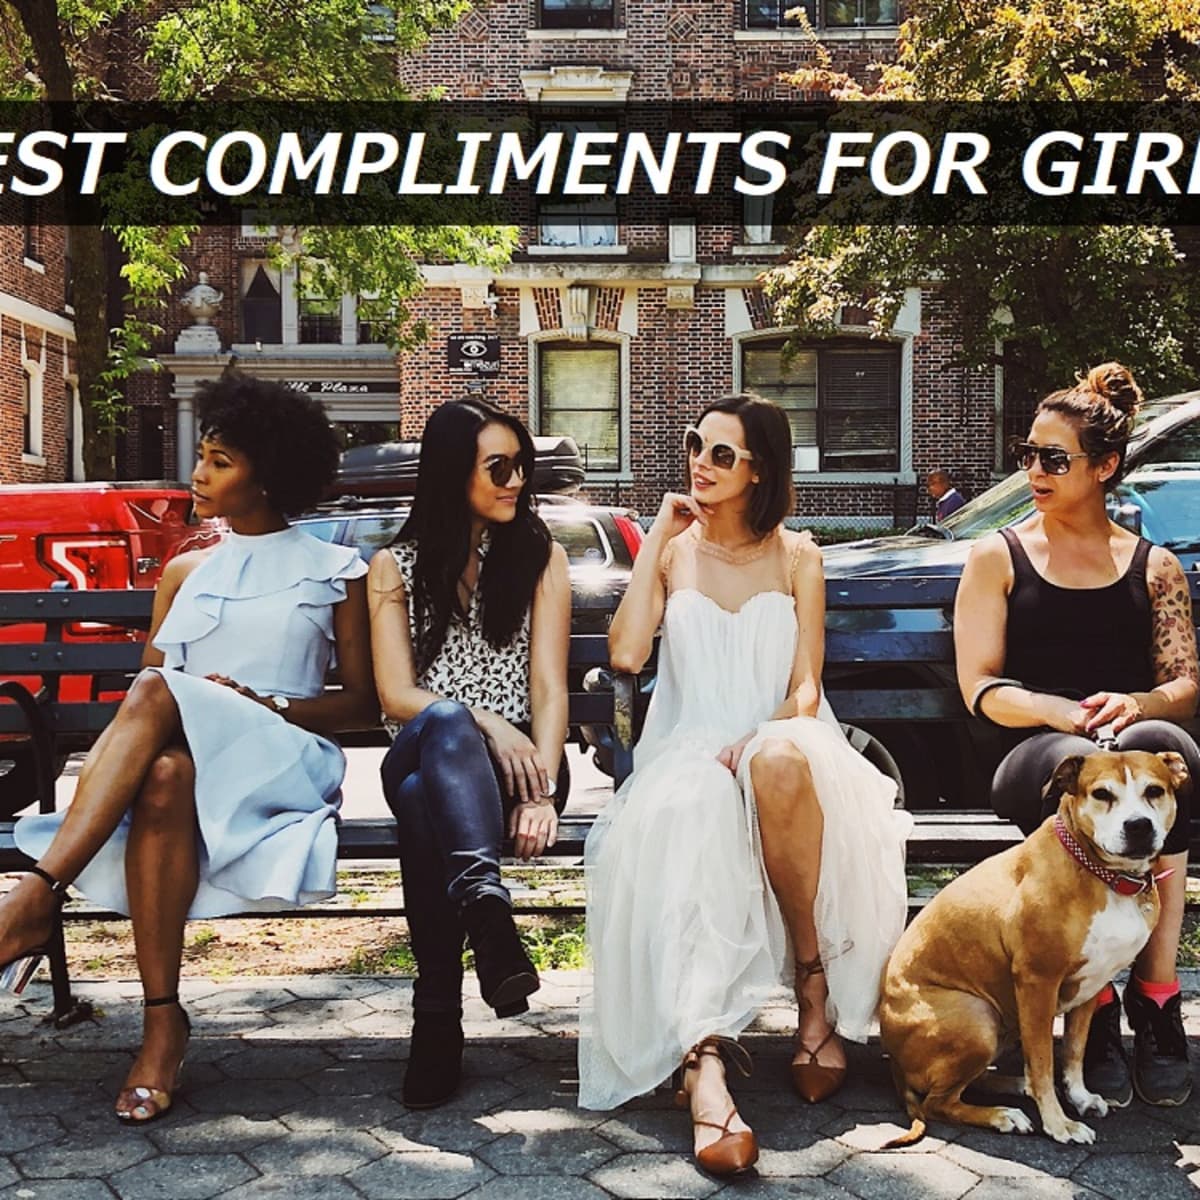 200+ Best Compliments for Girls - PairedLife